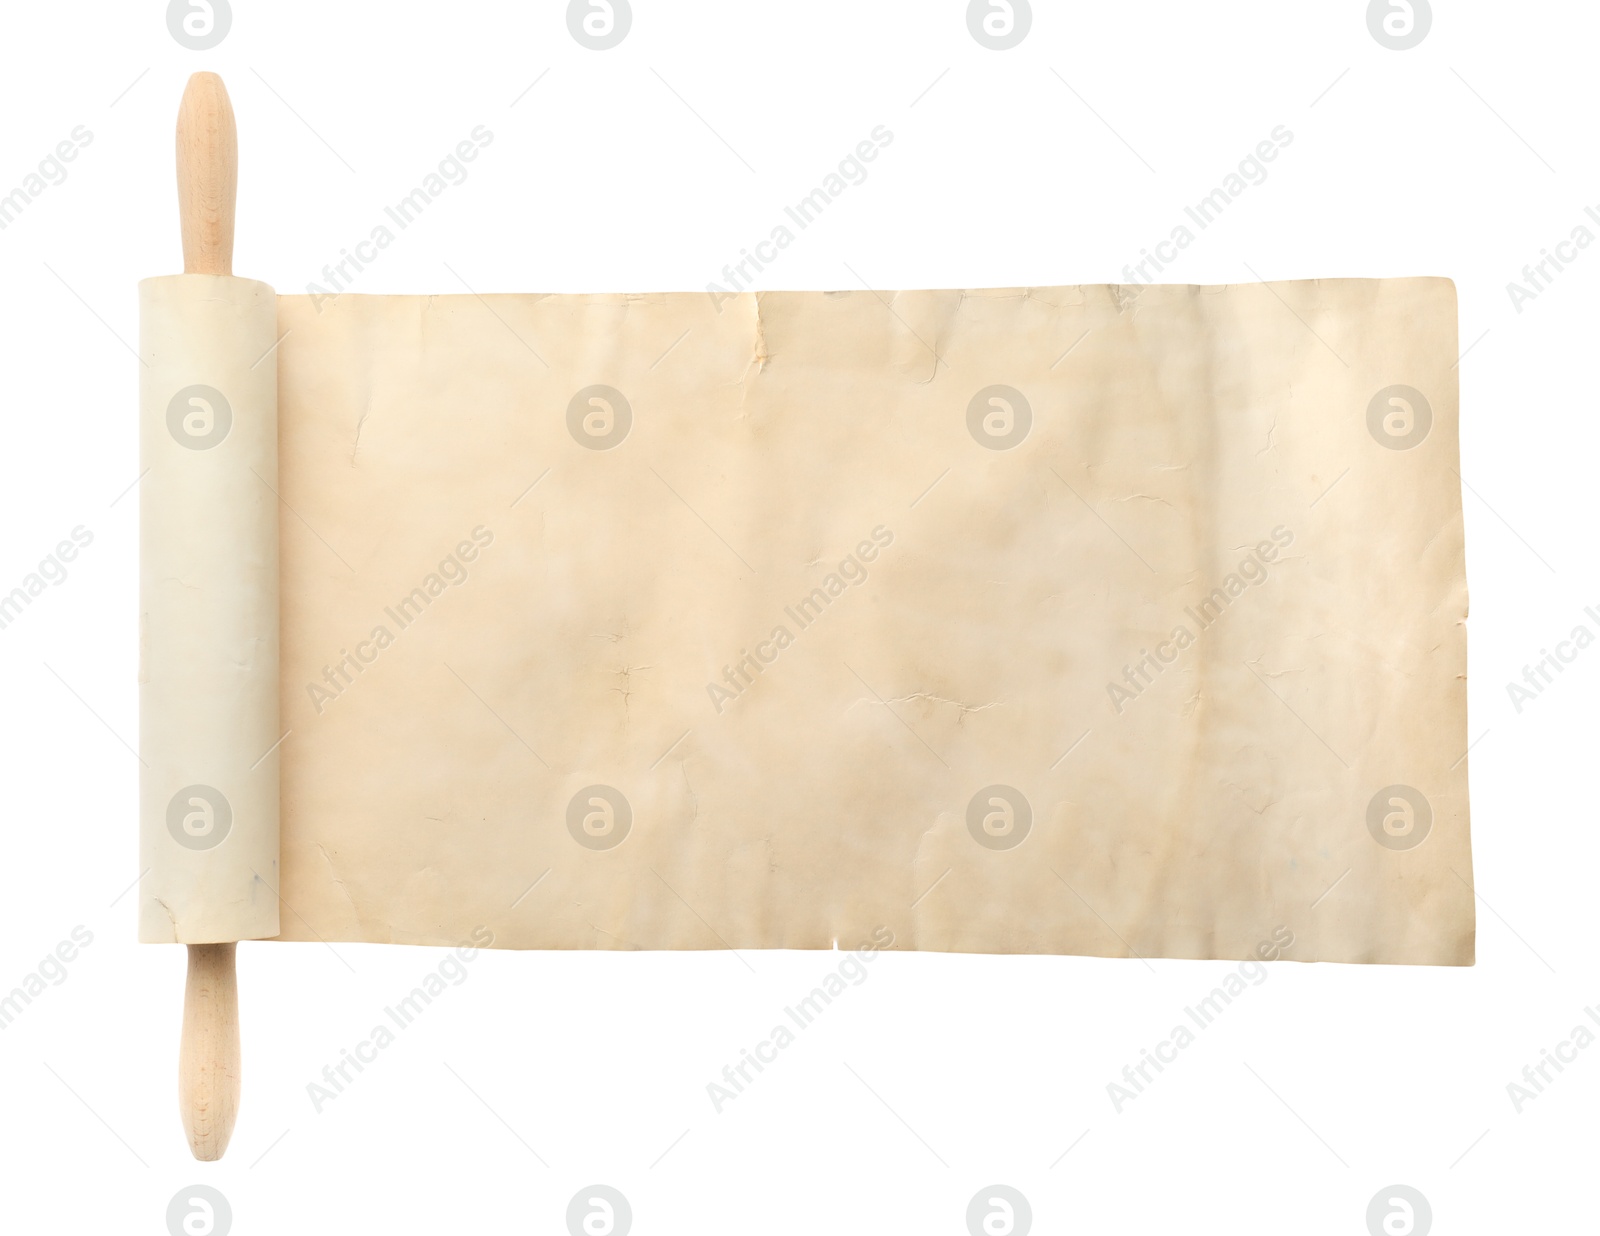 Photo of Scroll of old parchment paper with wooden handle isolated on white